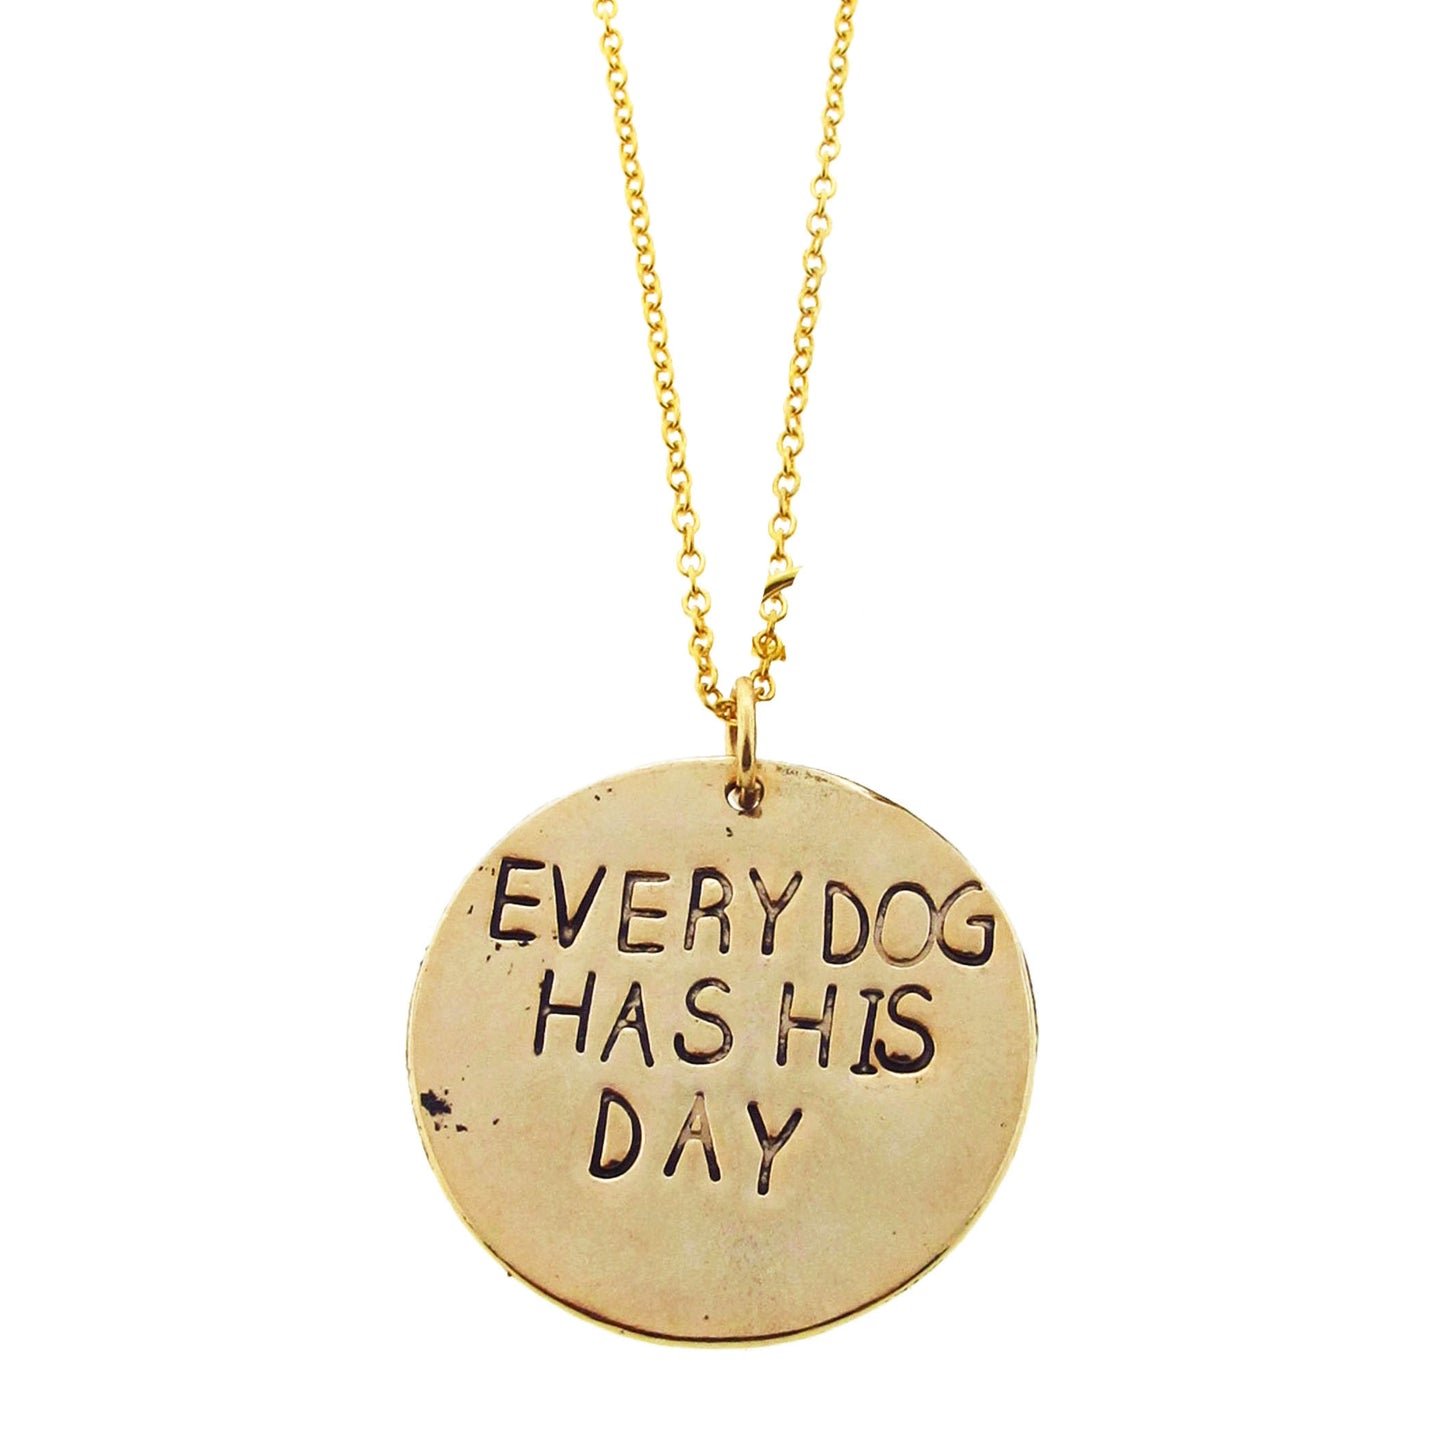 Every Dog Has His Day Hand Stamped Necklace